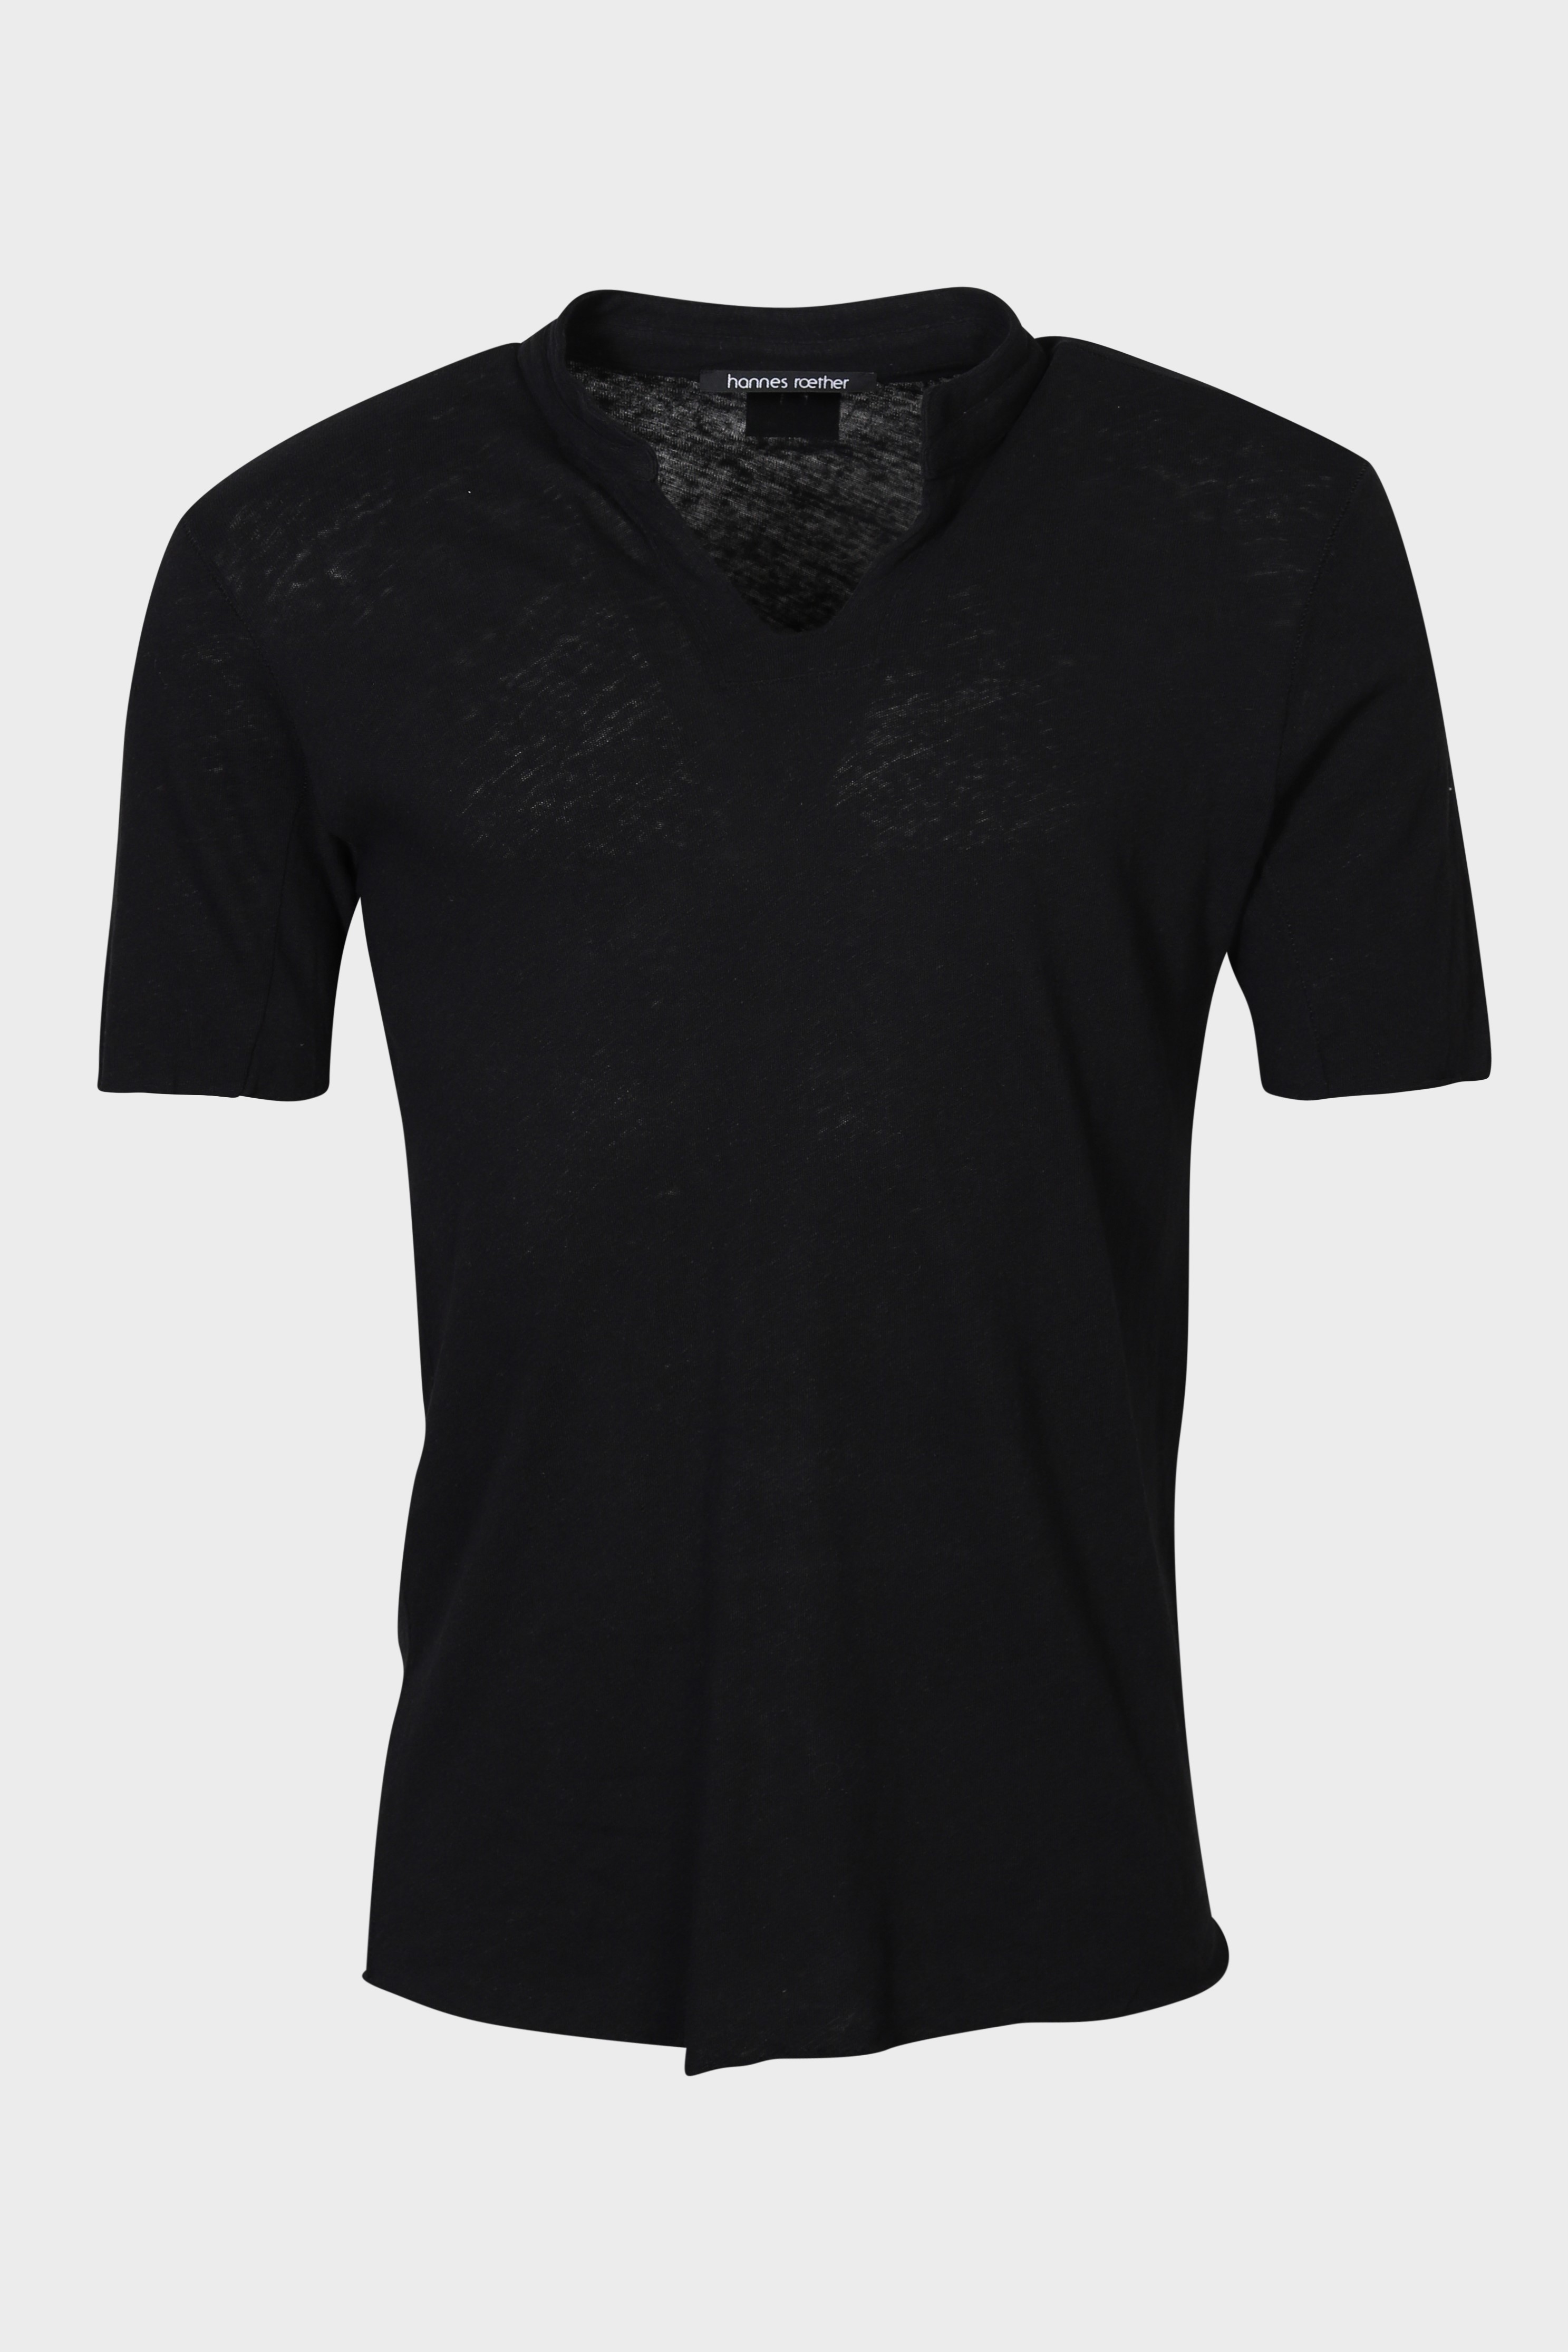 HANNES ROETHER Cotton Linen T-Shirt in Black 2XL